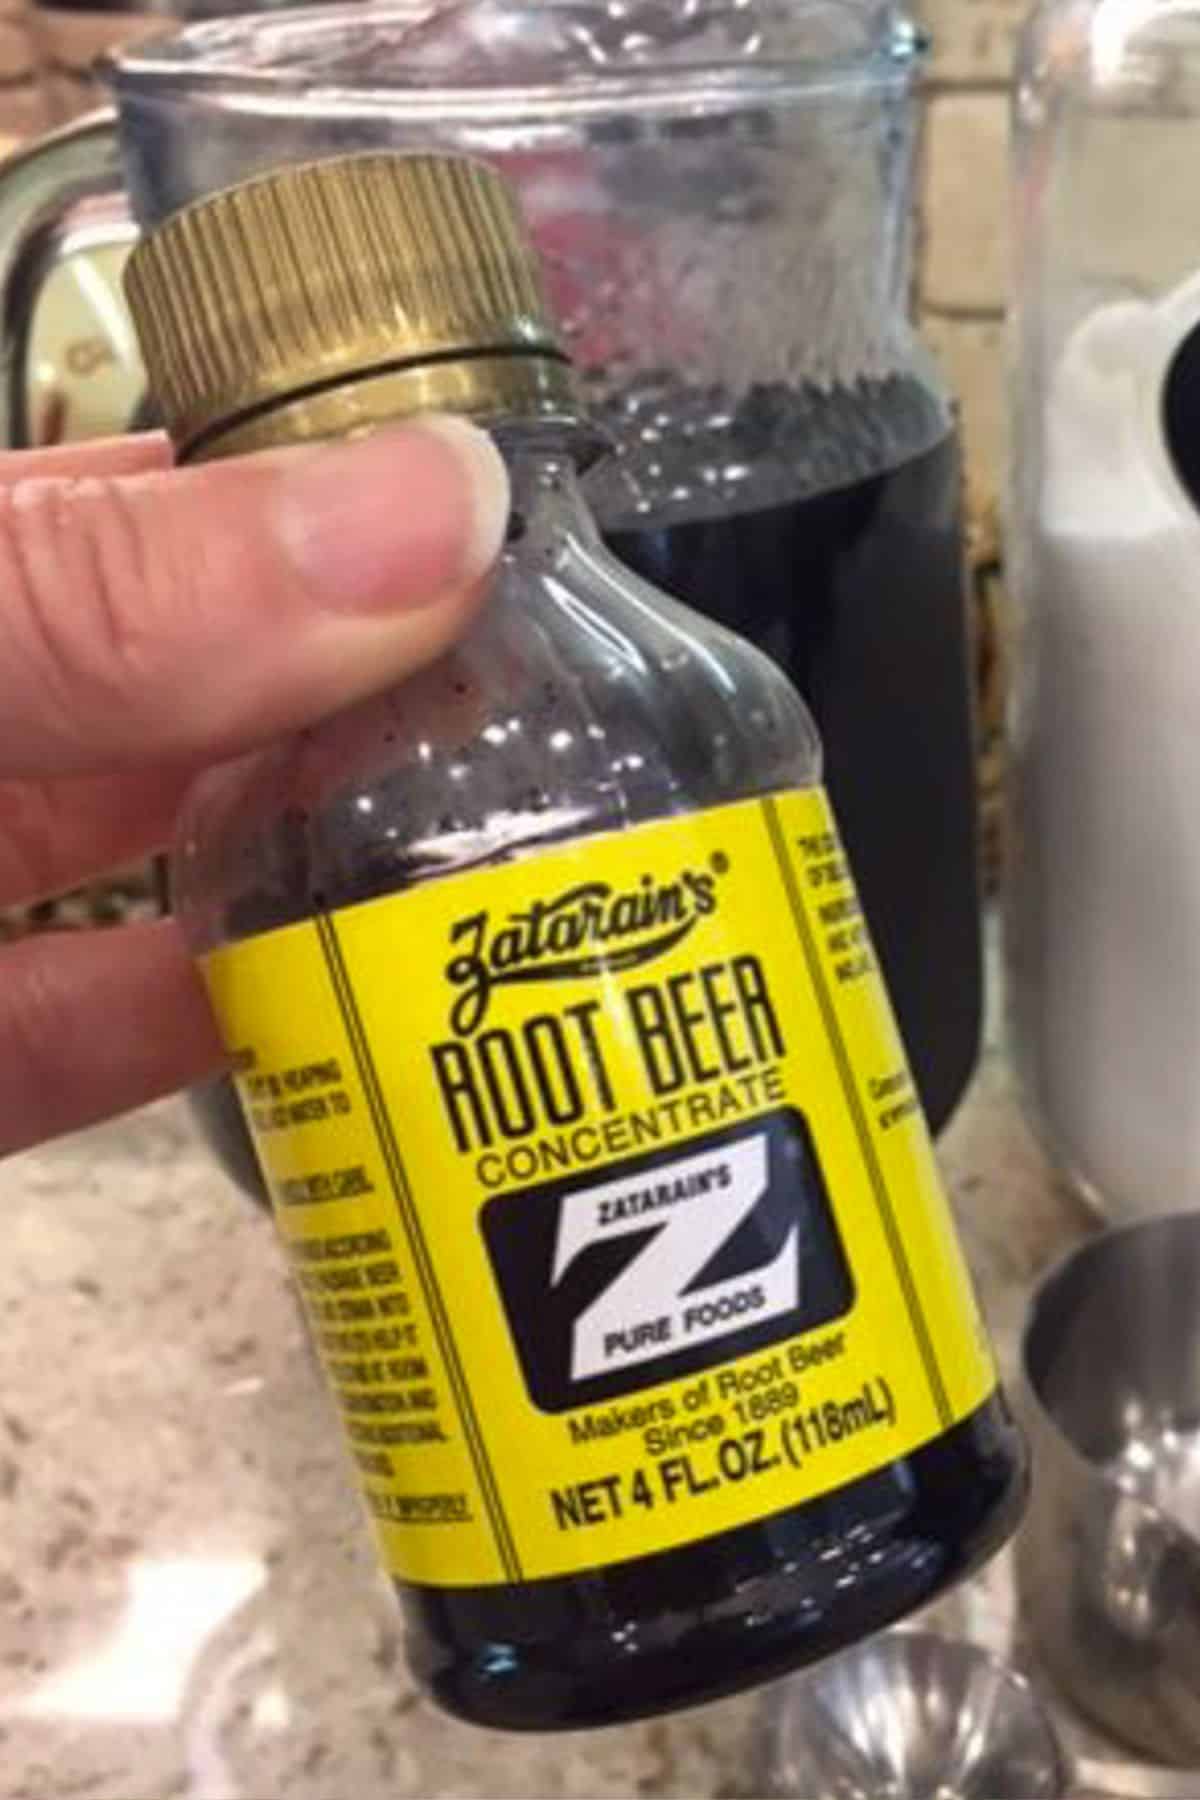 Fingers holding up a small bottle of Zatarain's root beer.